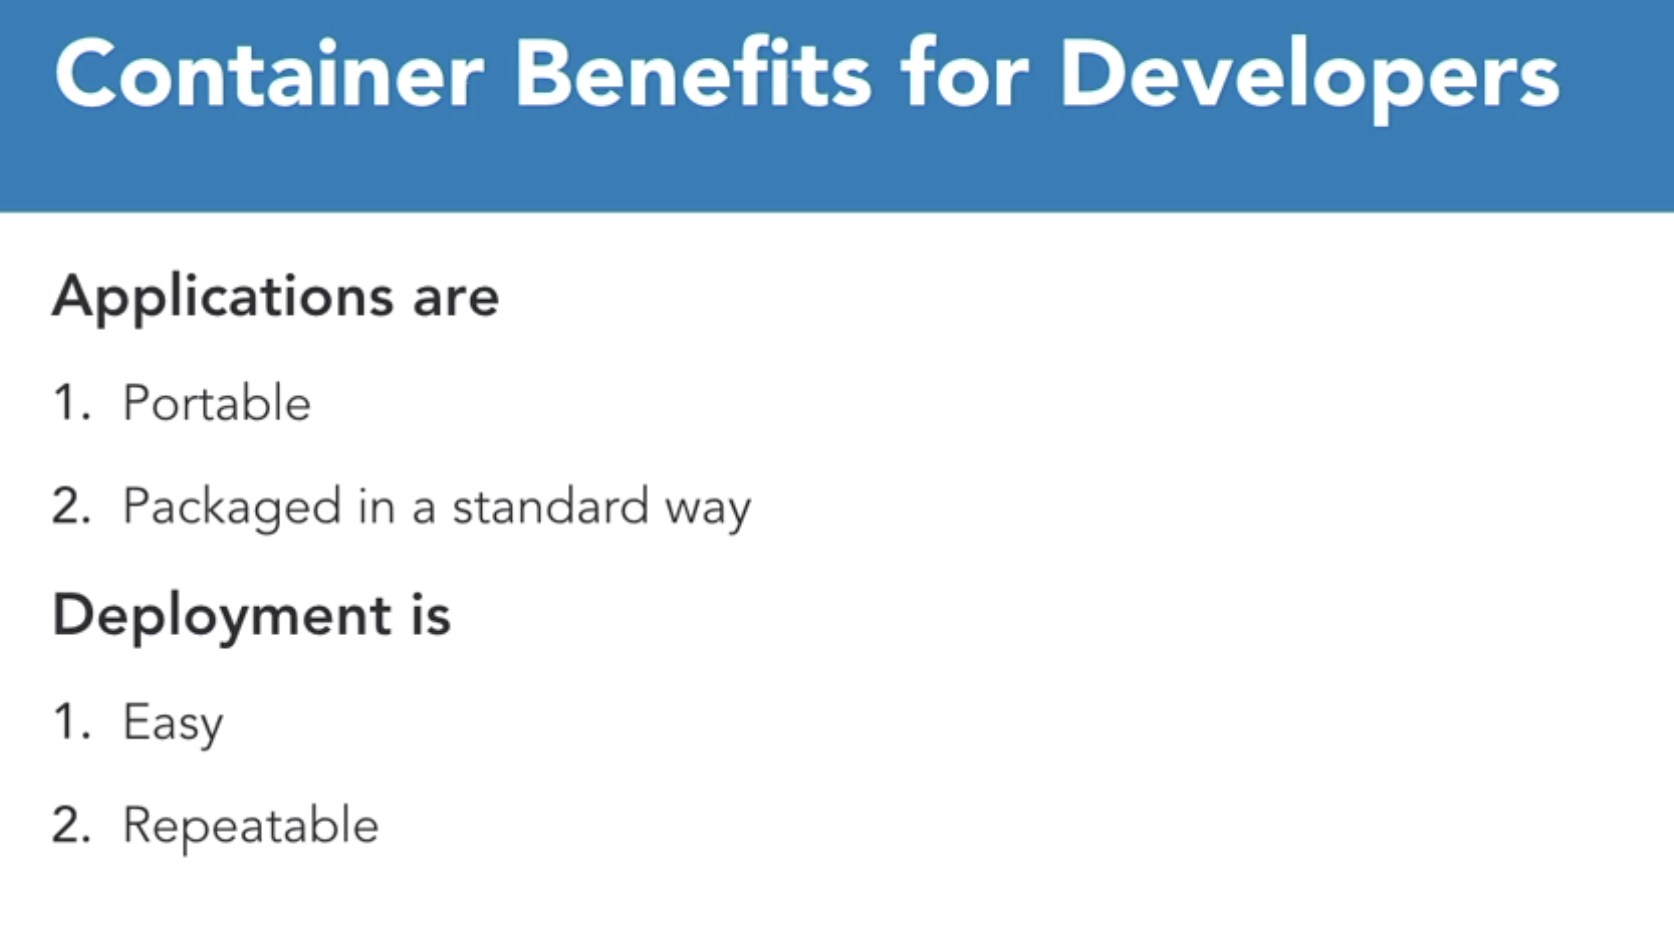 Benefits of containers for Developers